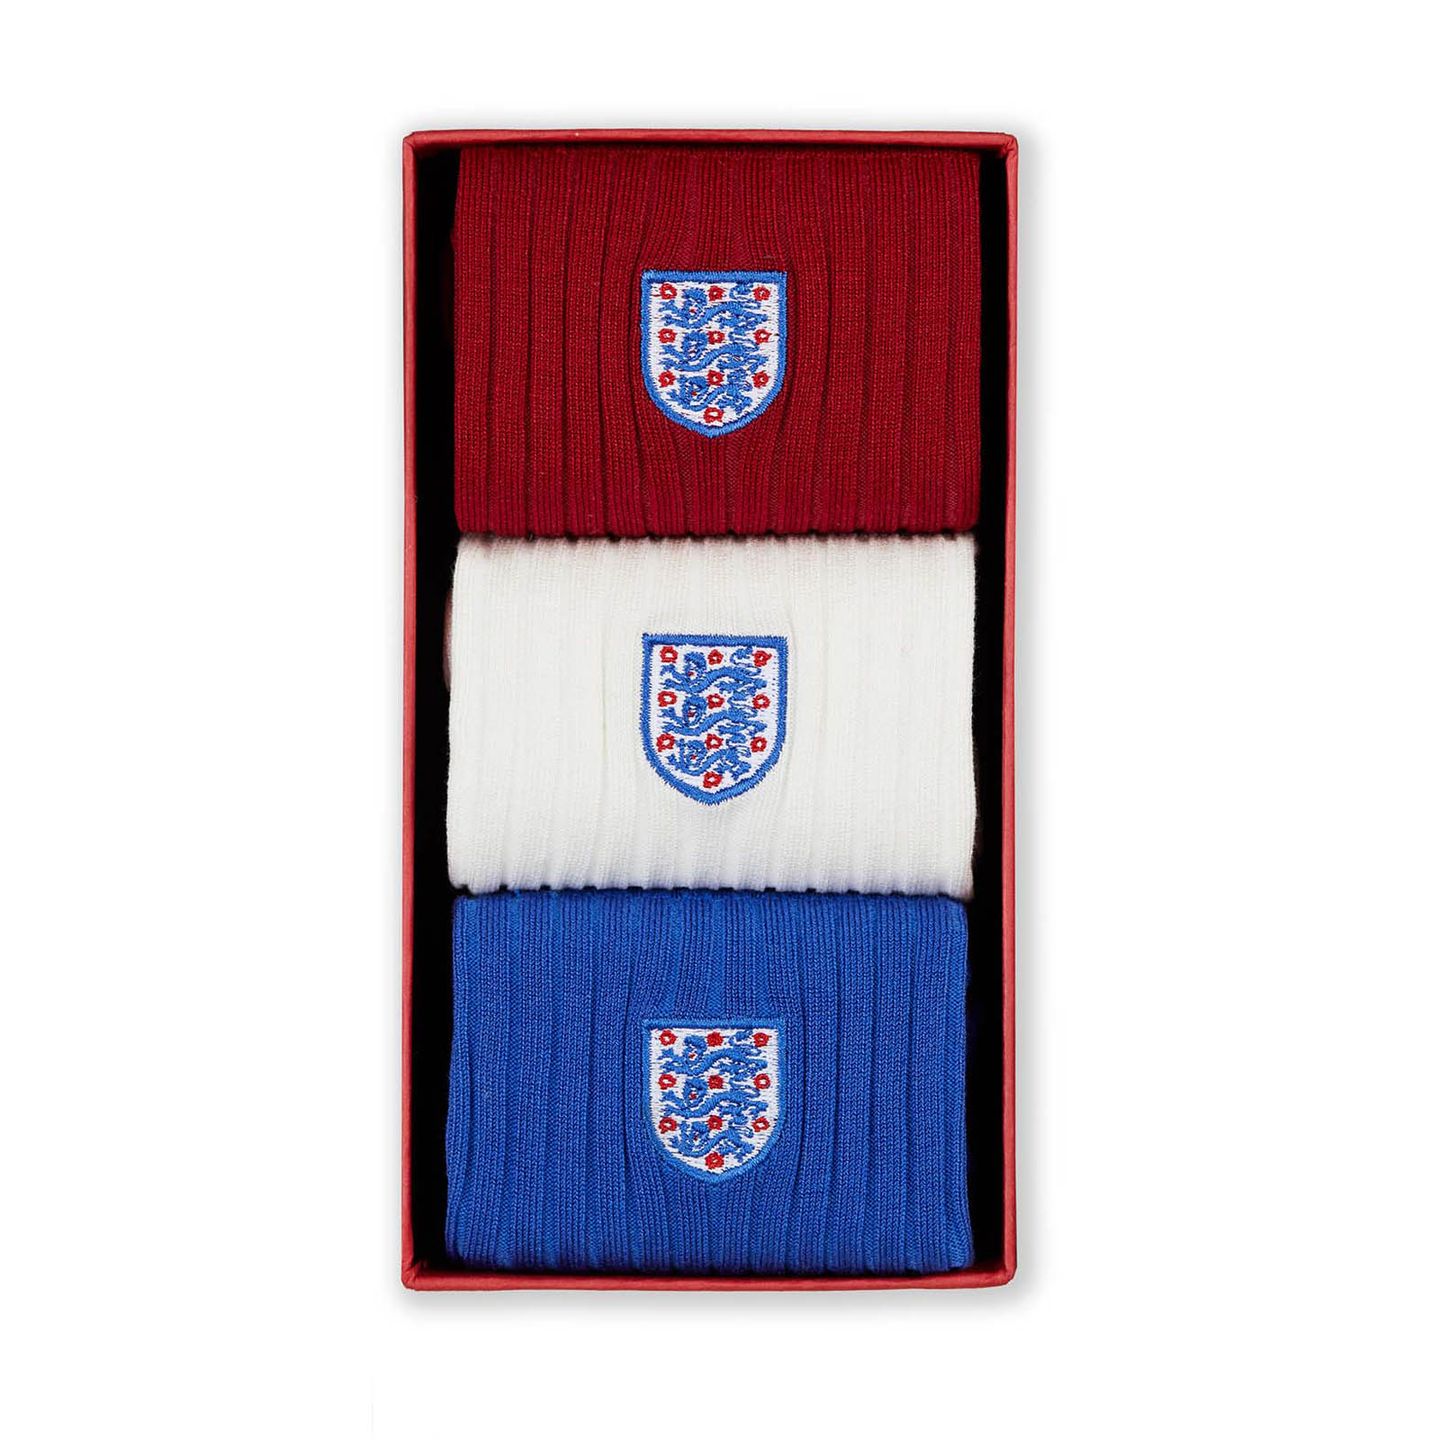 3 pair of england socks in a box